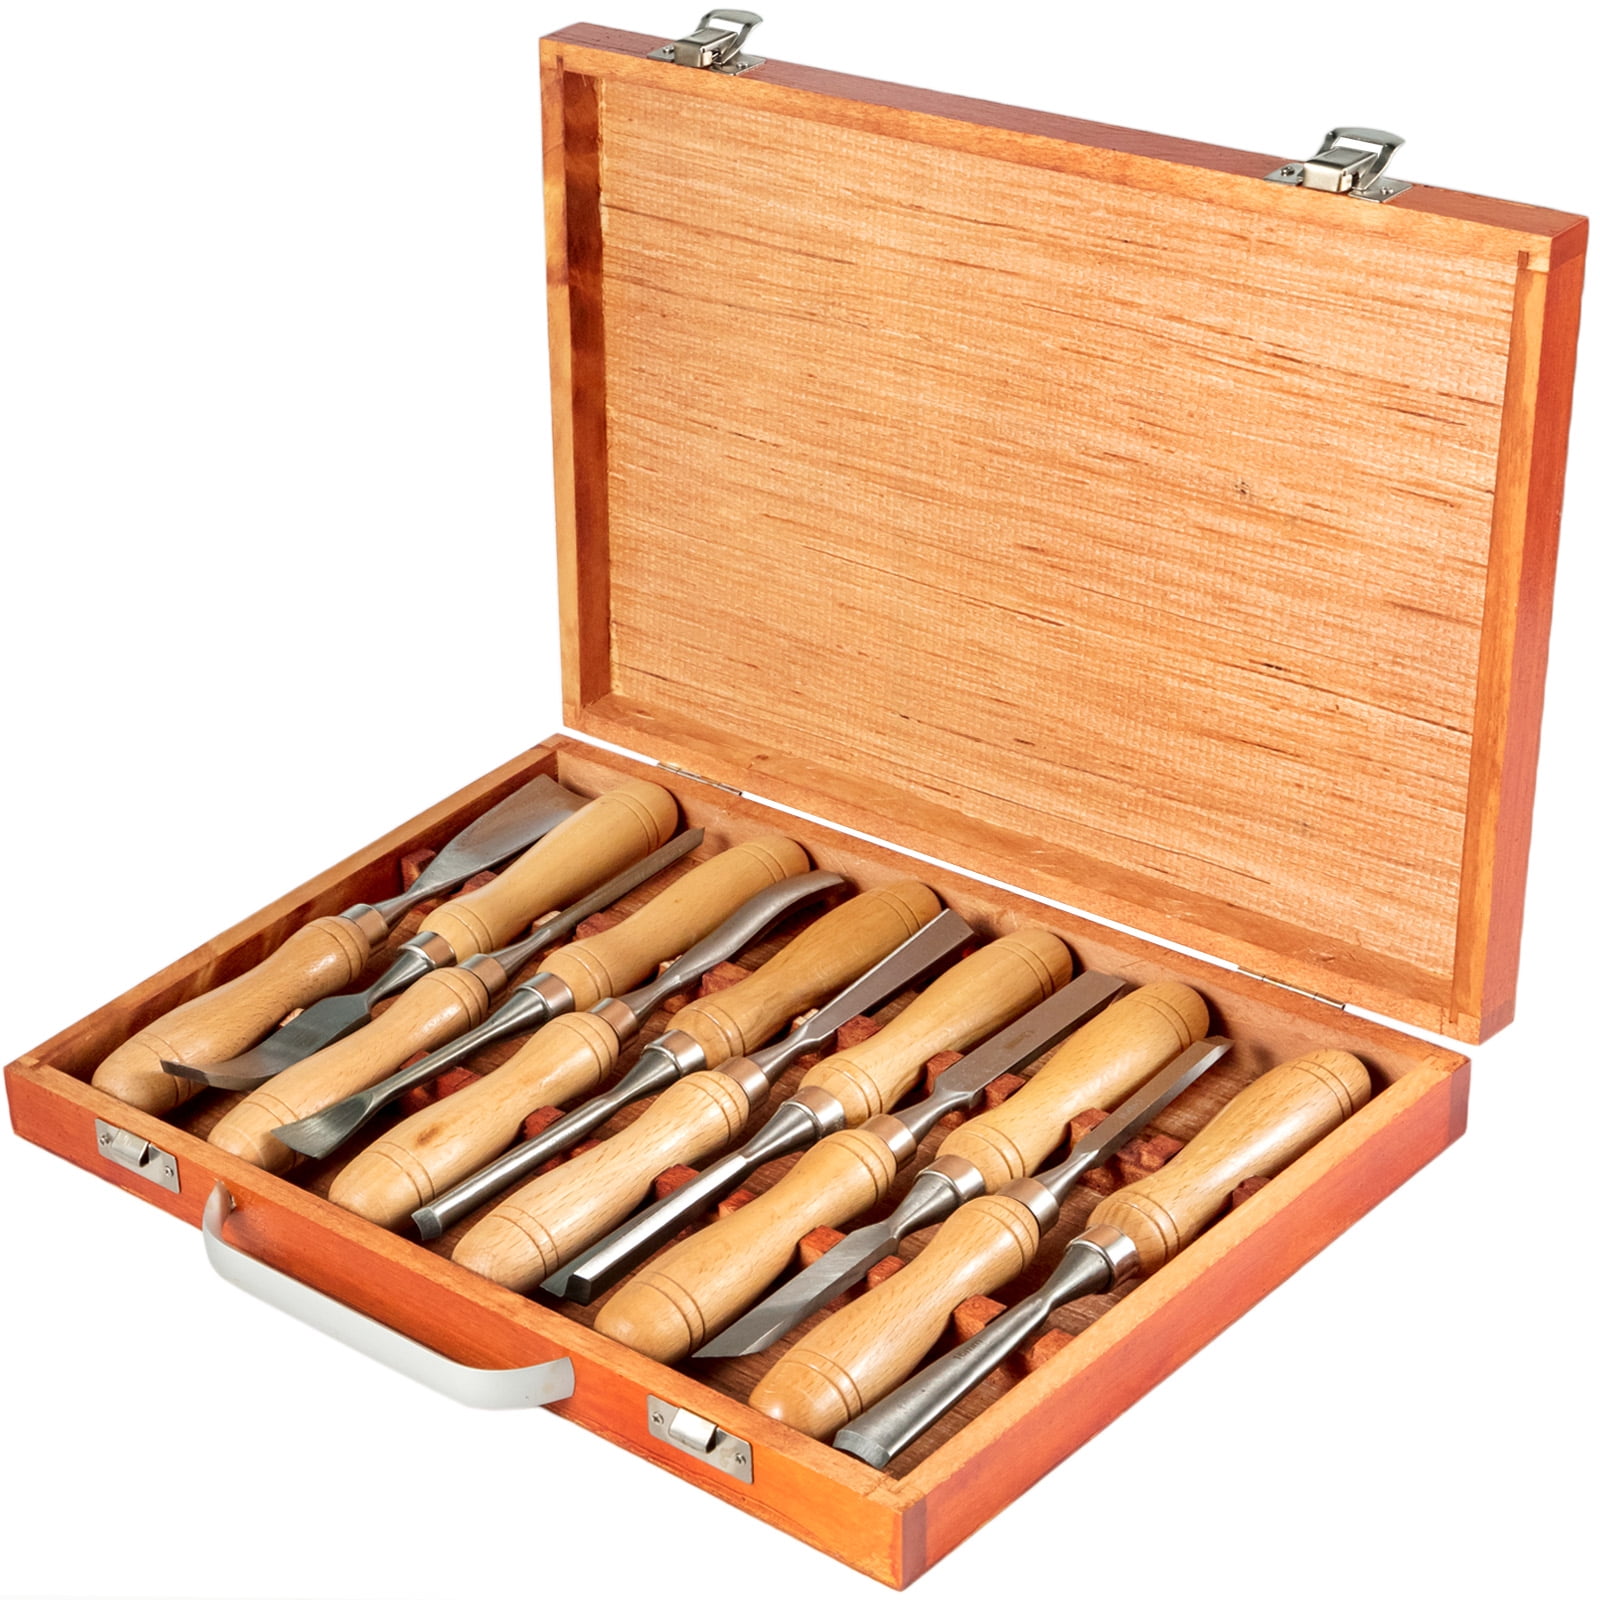 Wood Carving Chisel Tools, Steel 6Pcs Wood Carving Chisel Set Comfortable  Closely Connect With Beech Wood Handle For Woodworking?Sculpture For